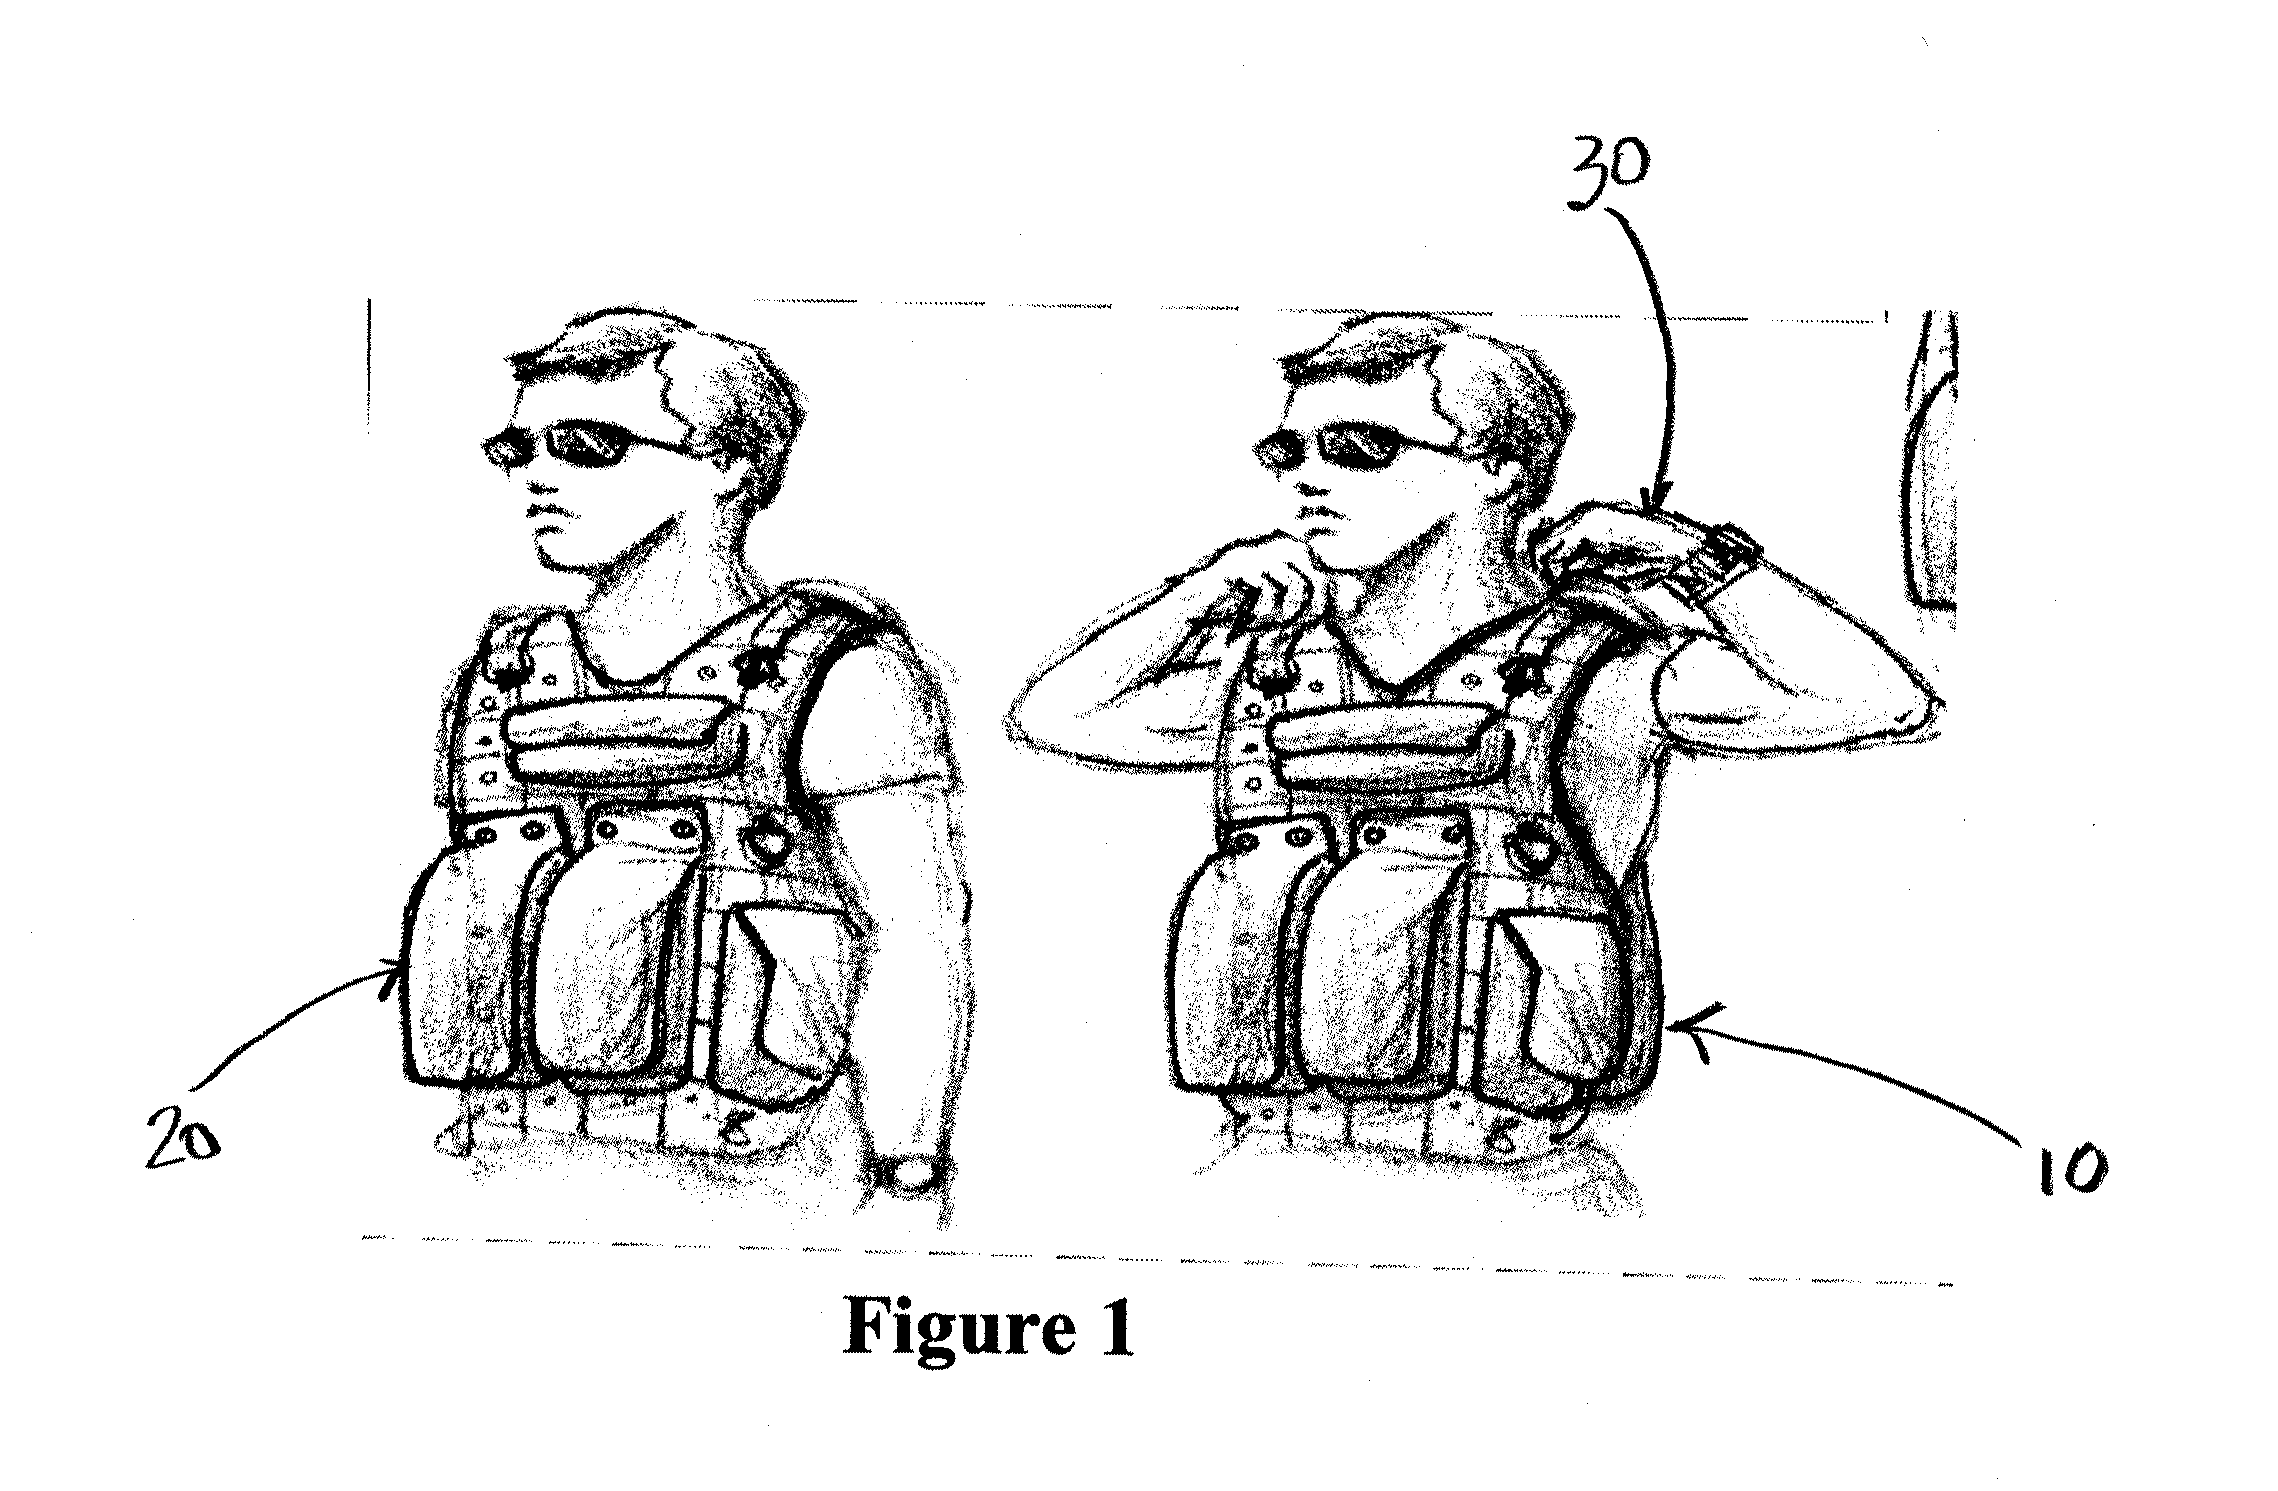 Ergonomic rotatable apparatus and method for use thereof to carry and store equipment and accessories